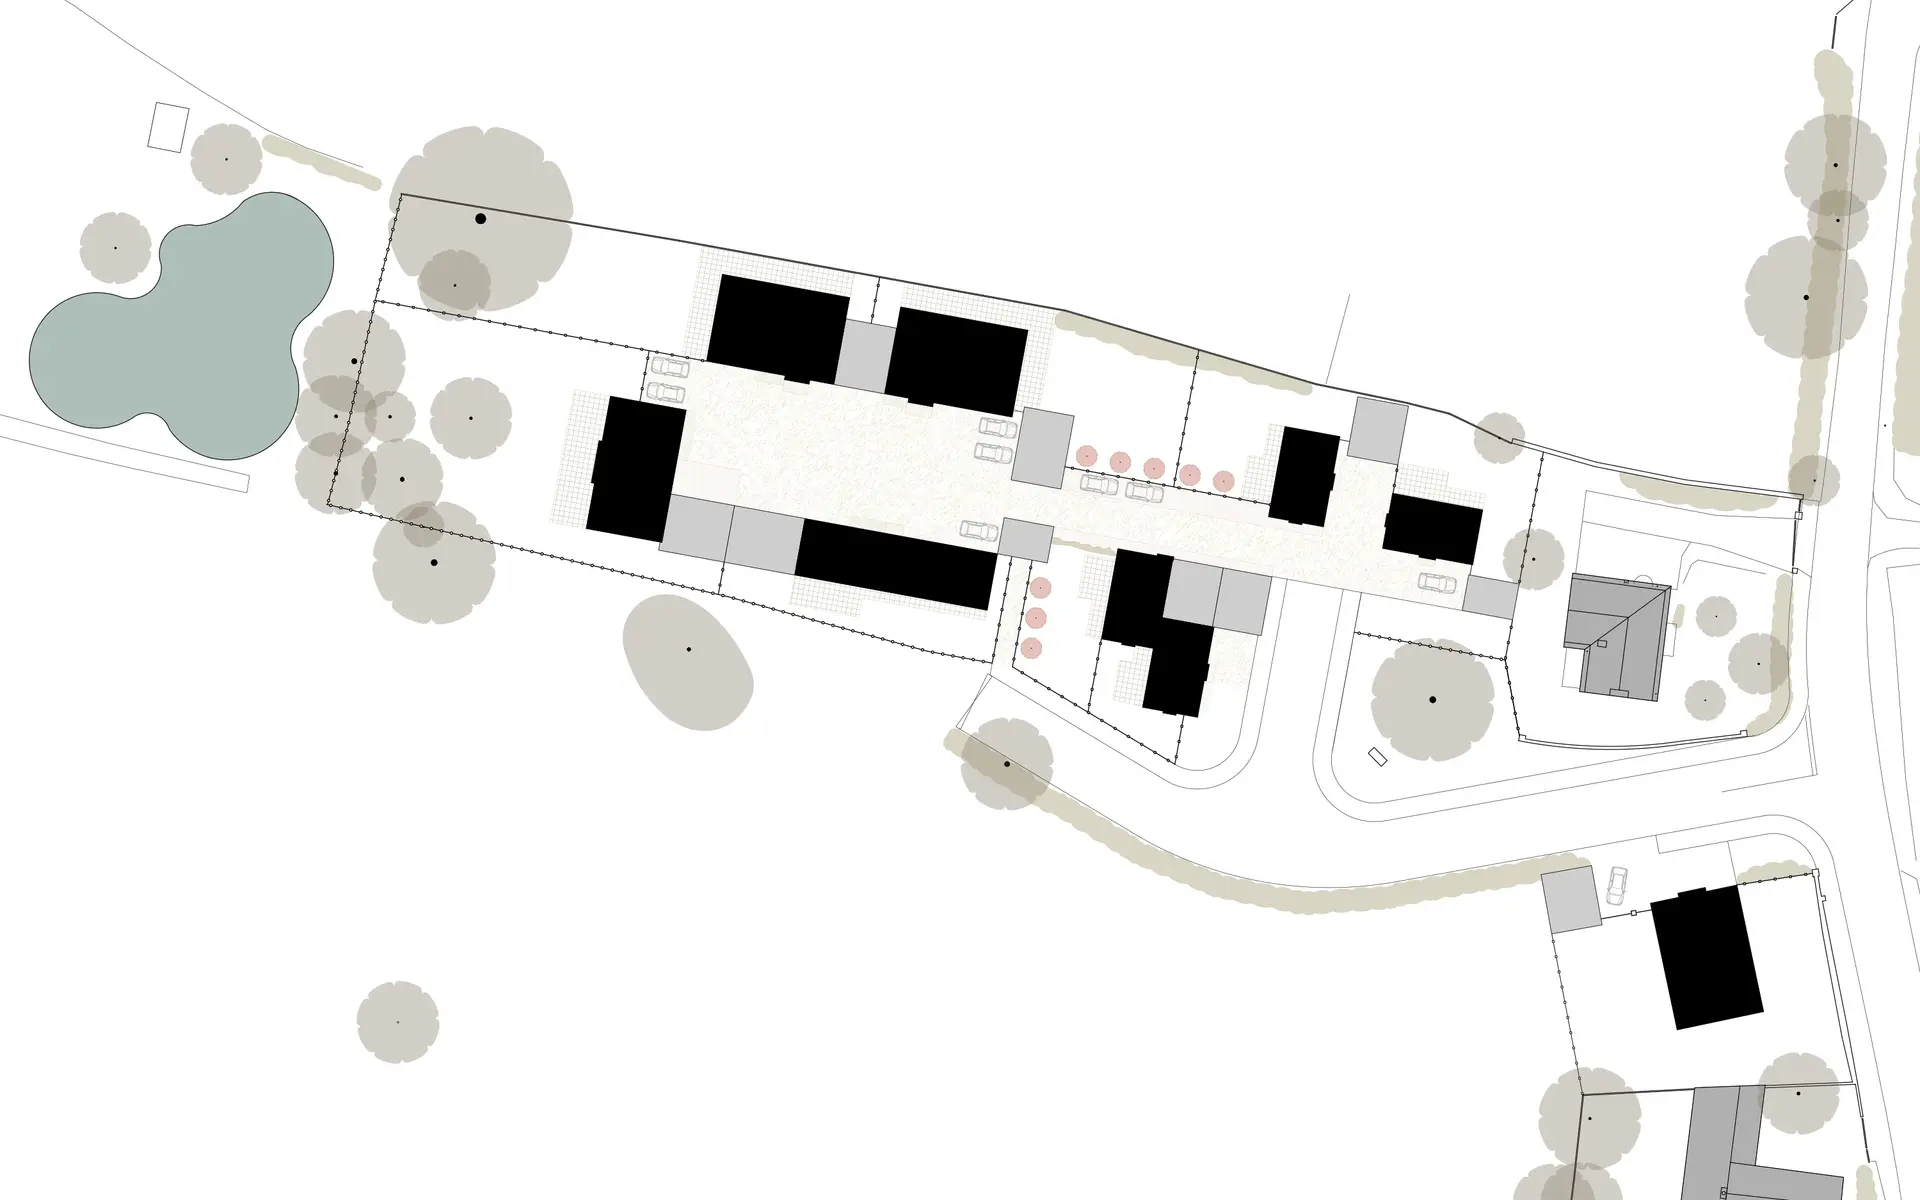 Site layout plan with house 1 to the right, cottages arranged around the lime tree and new housing defining the yard beyond